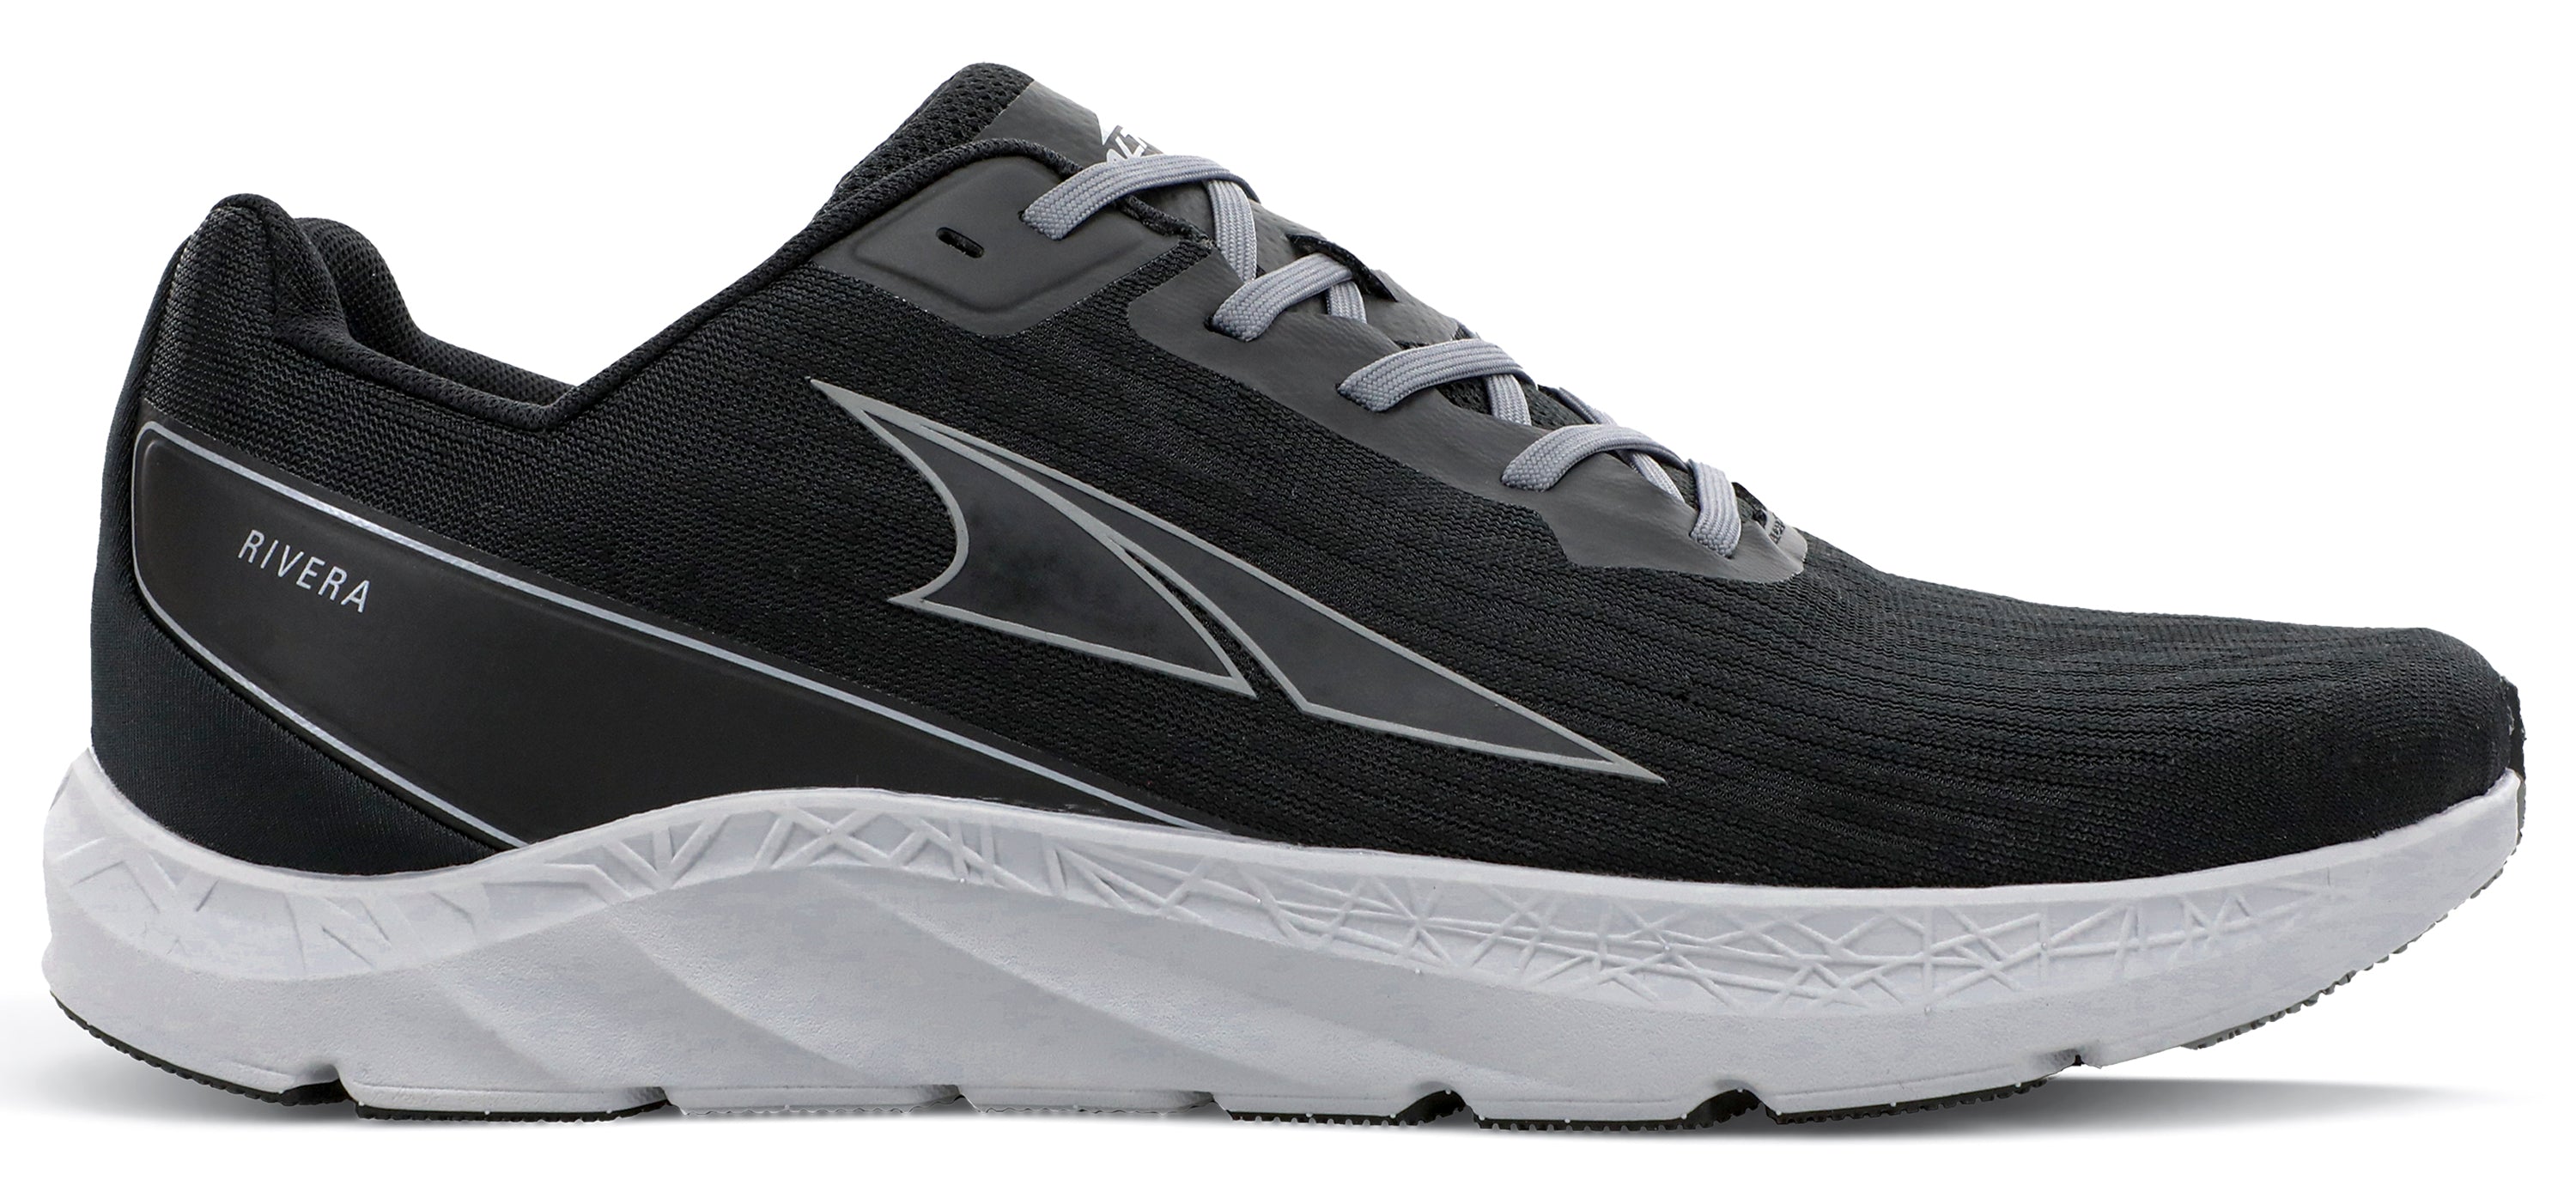 Altra Men's Rivera Road Running Shoe in Black/Gray from the side